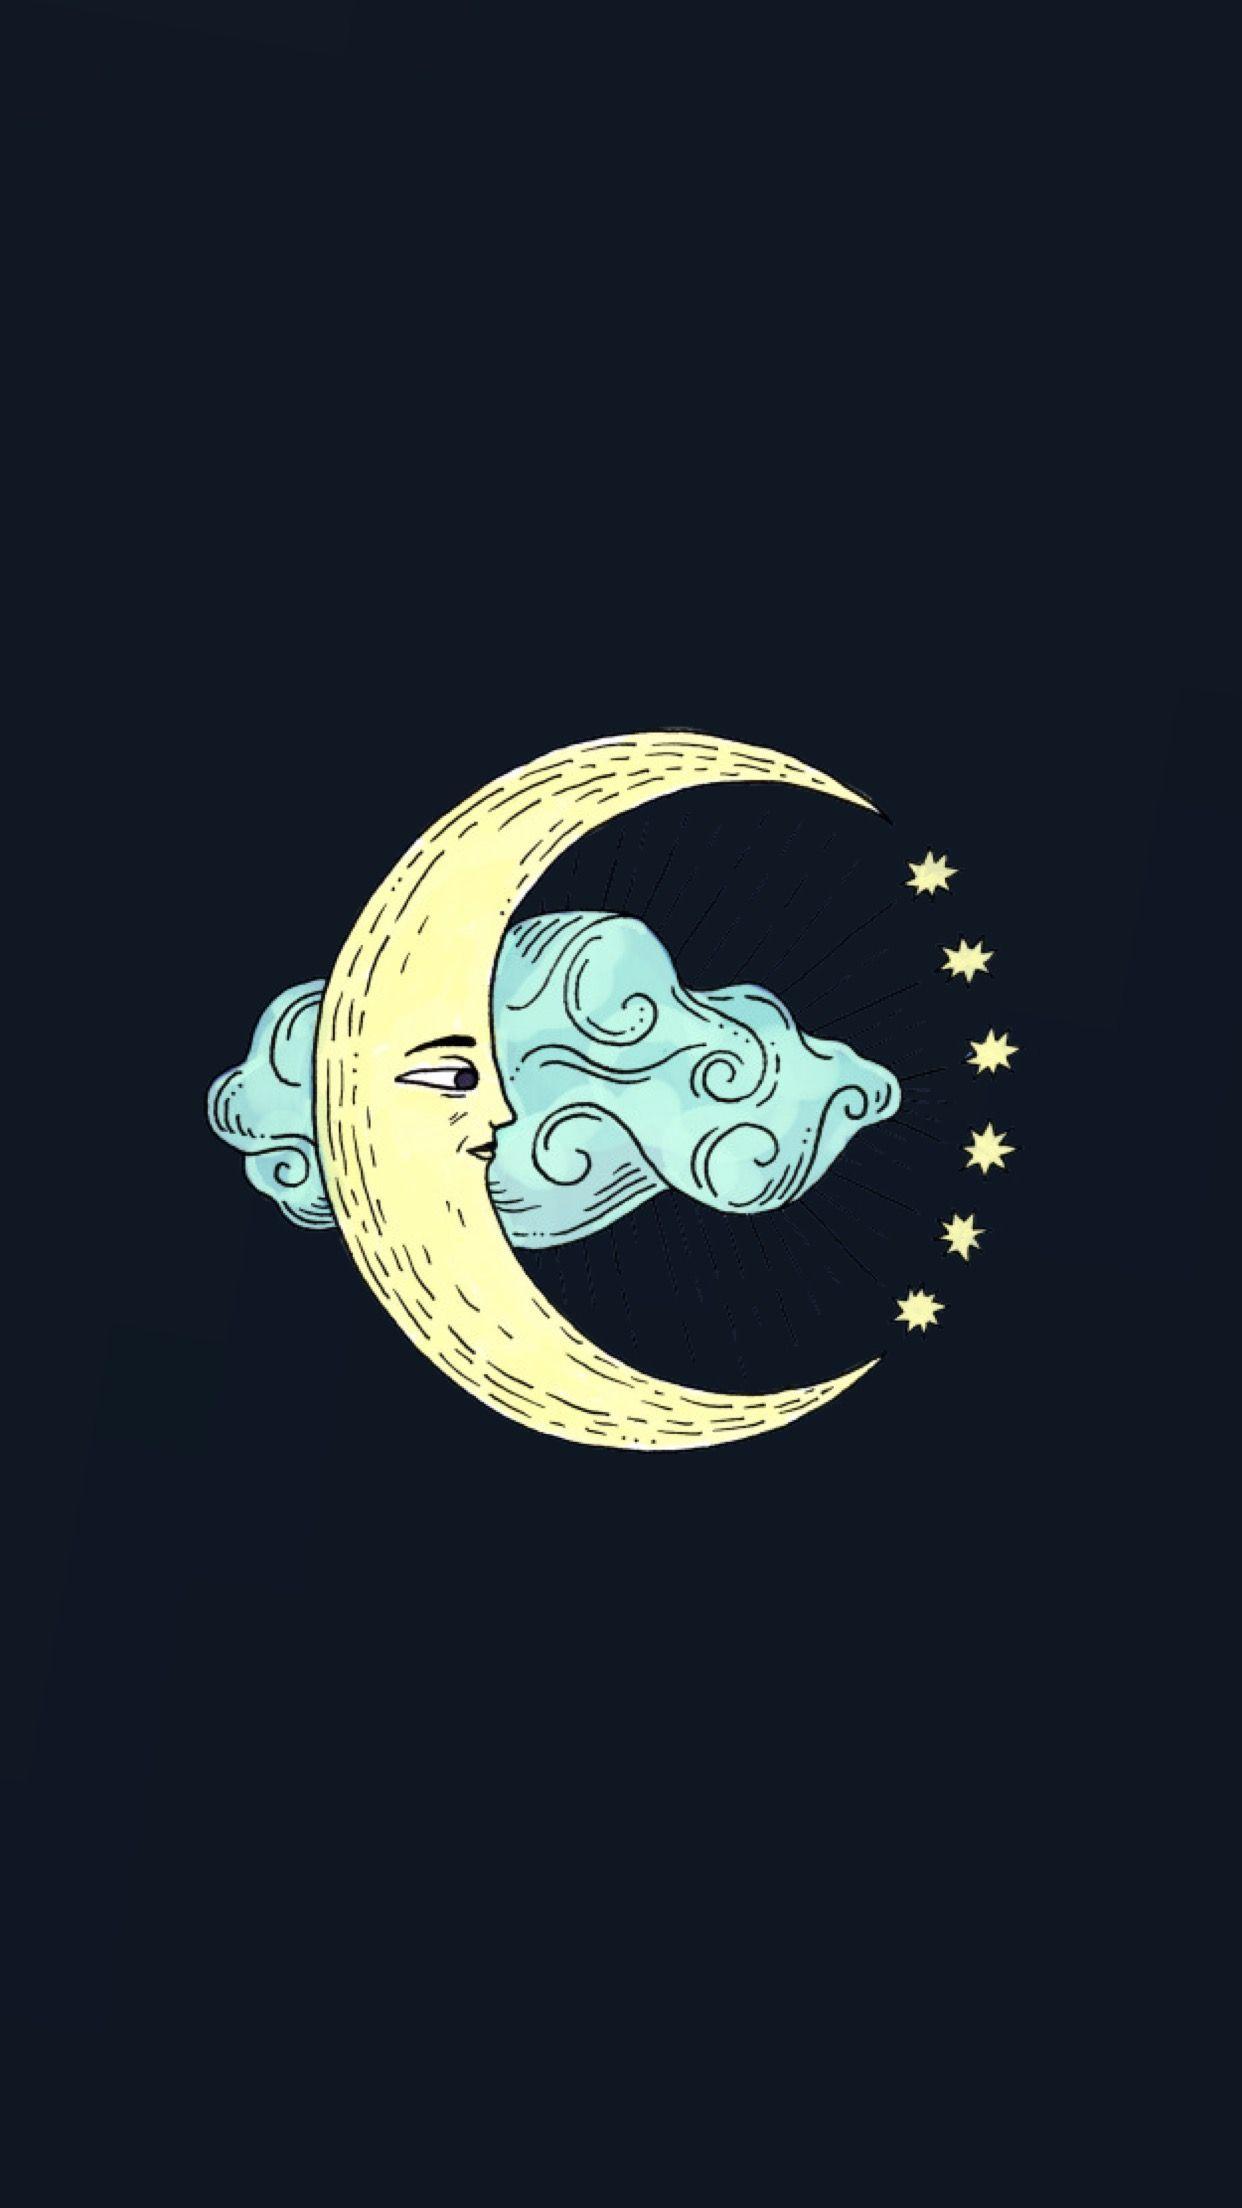 Moon in the clouds wallpaper. made by Laurette. instagram